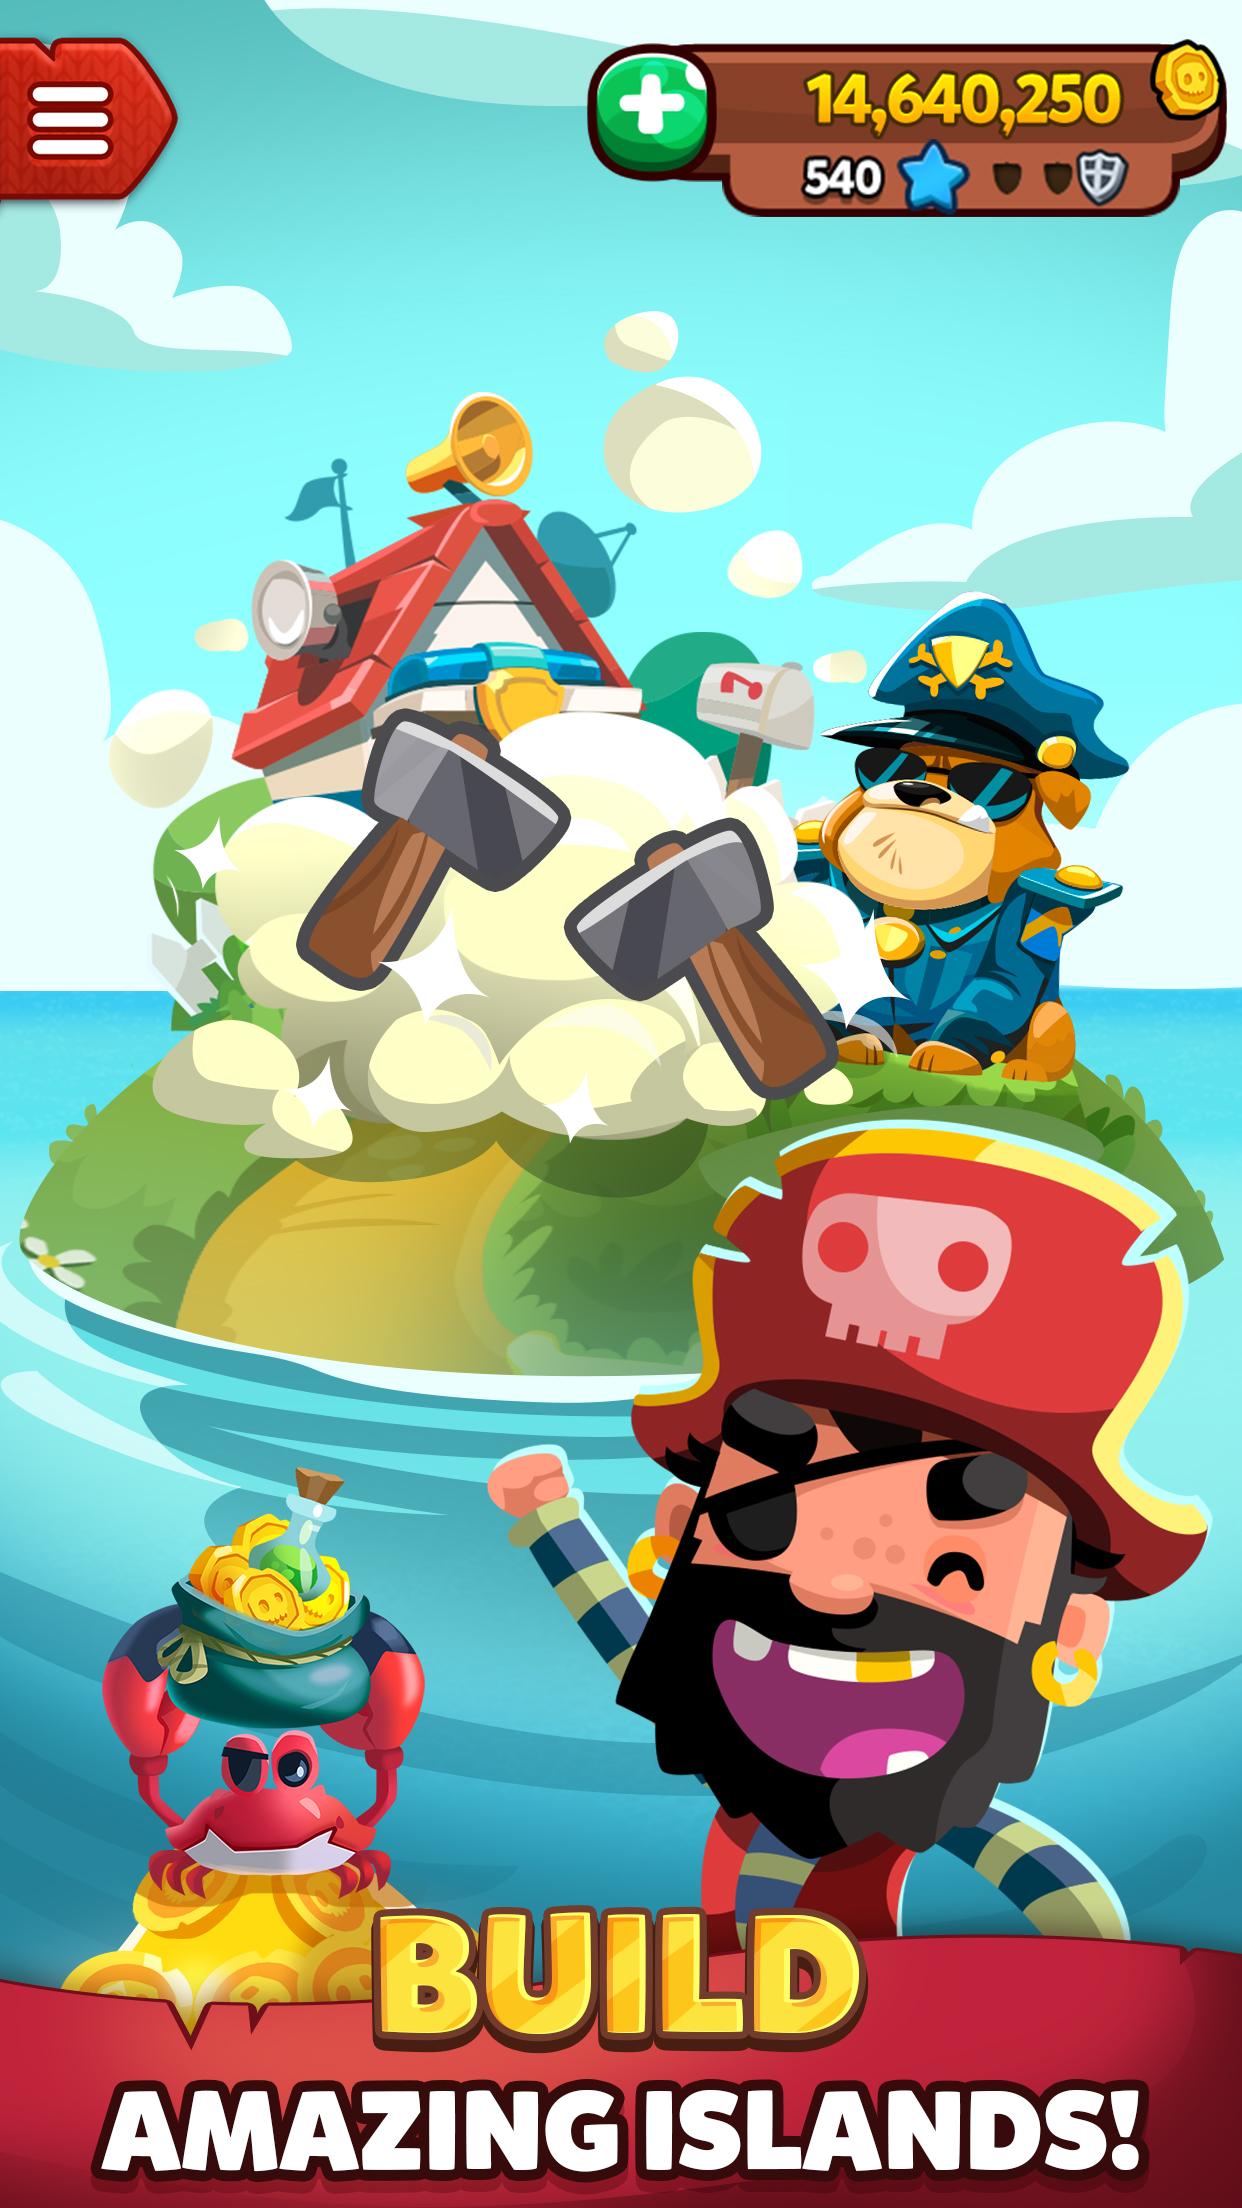 Pirate Kings for Android - APK Download